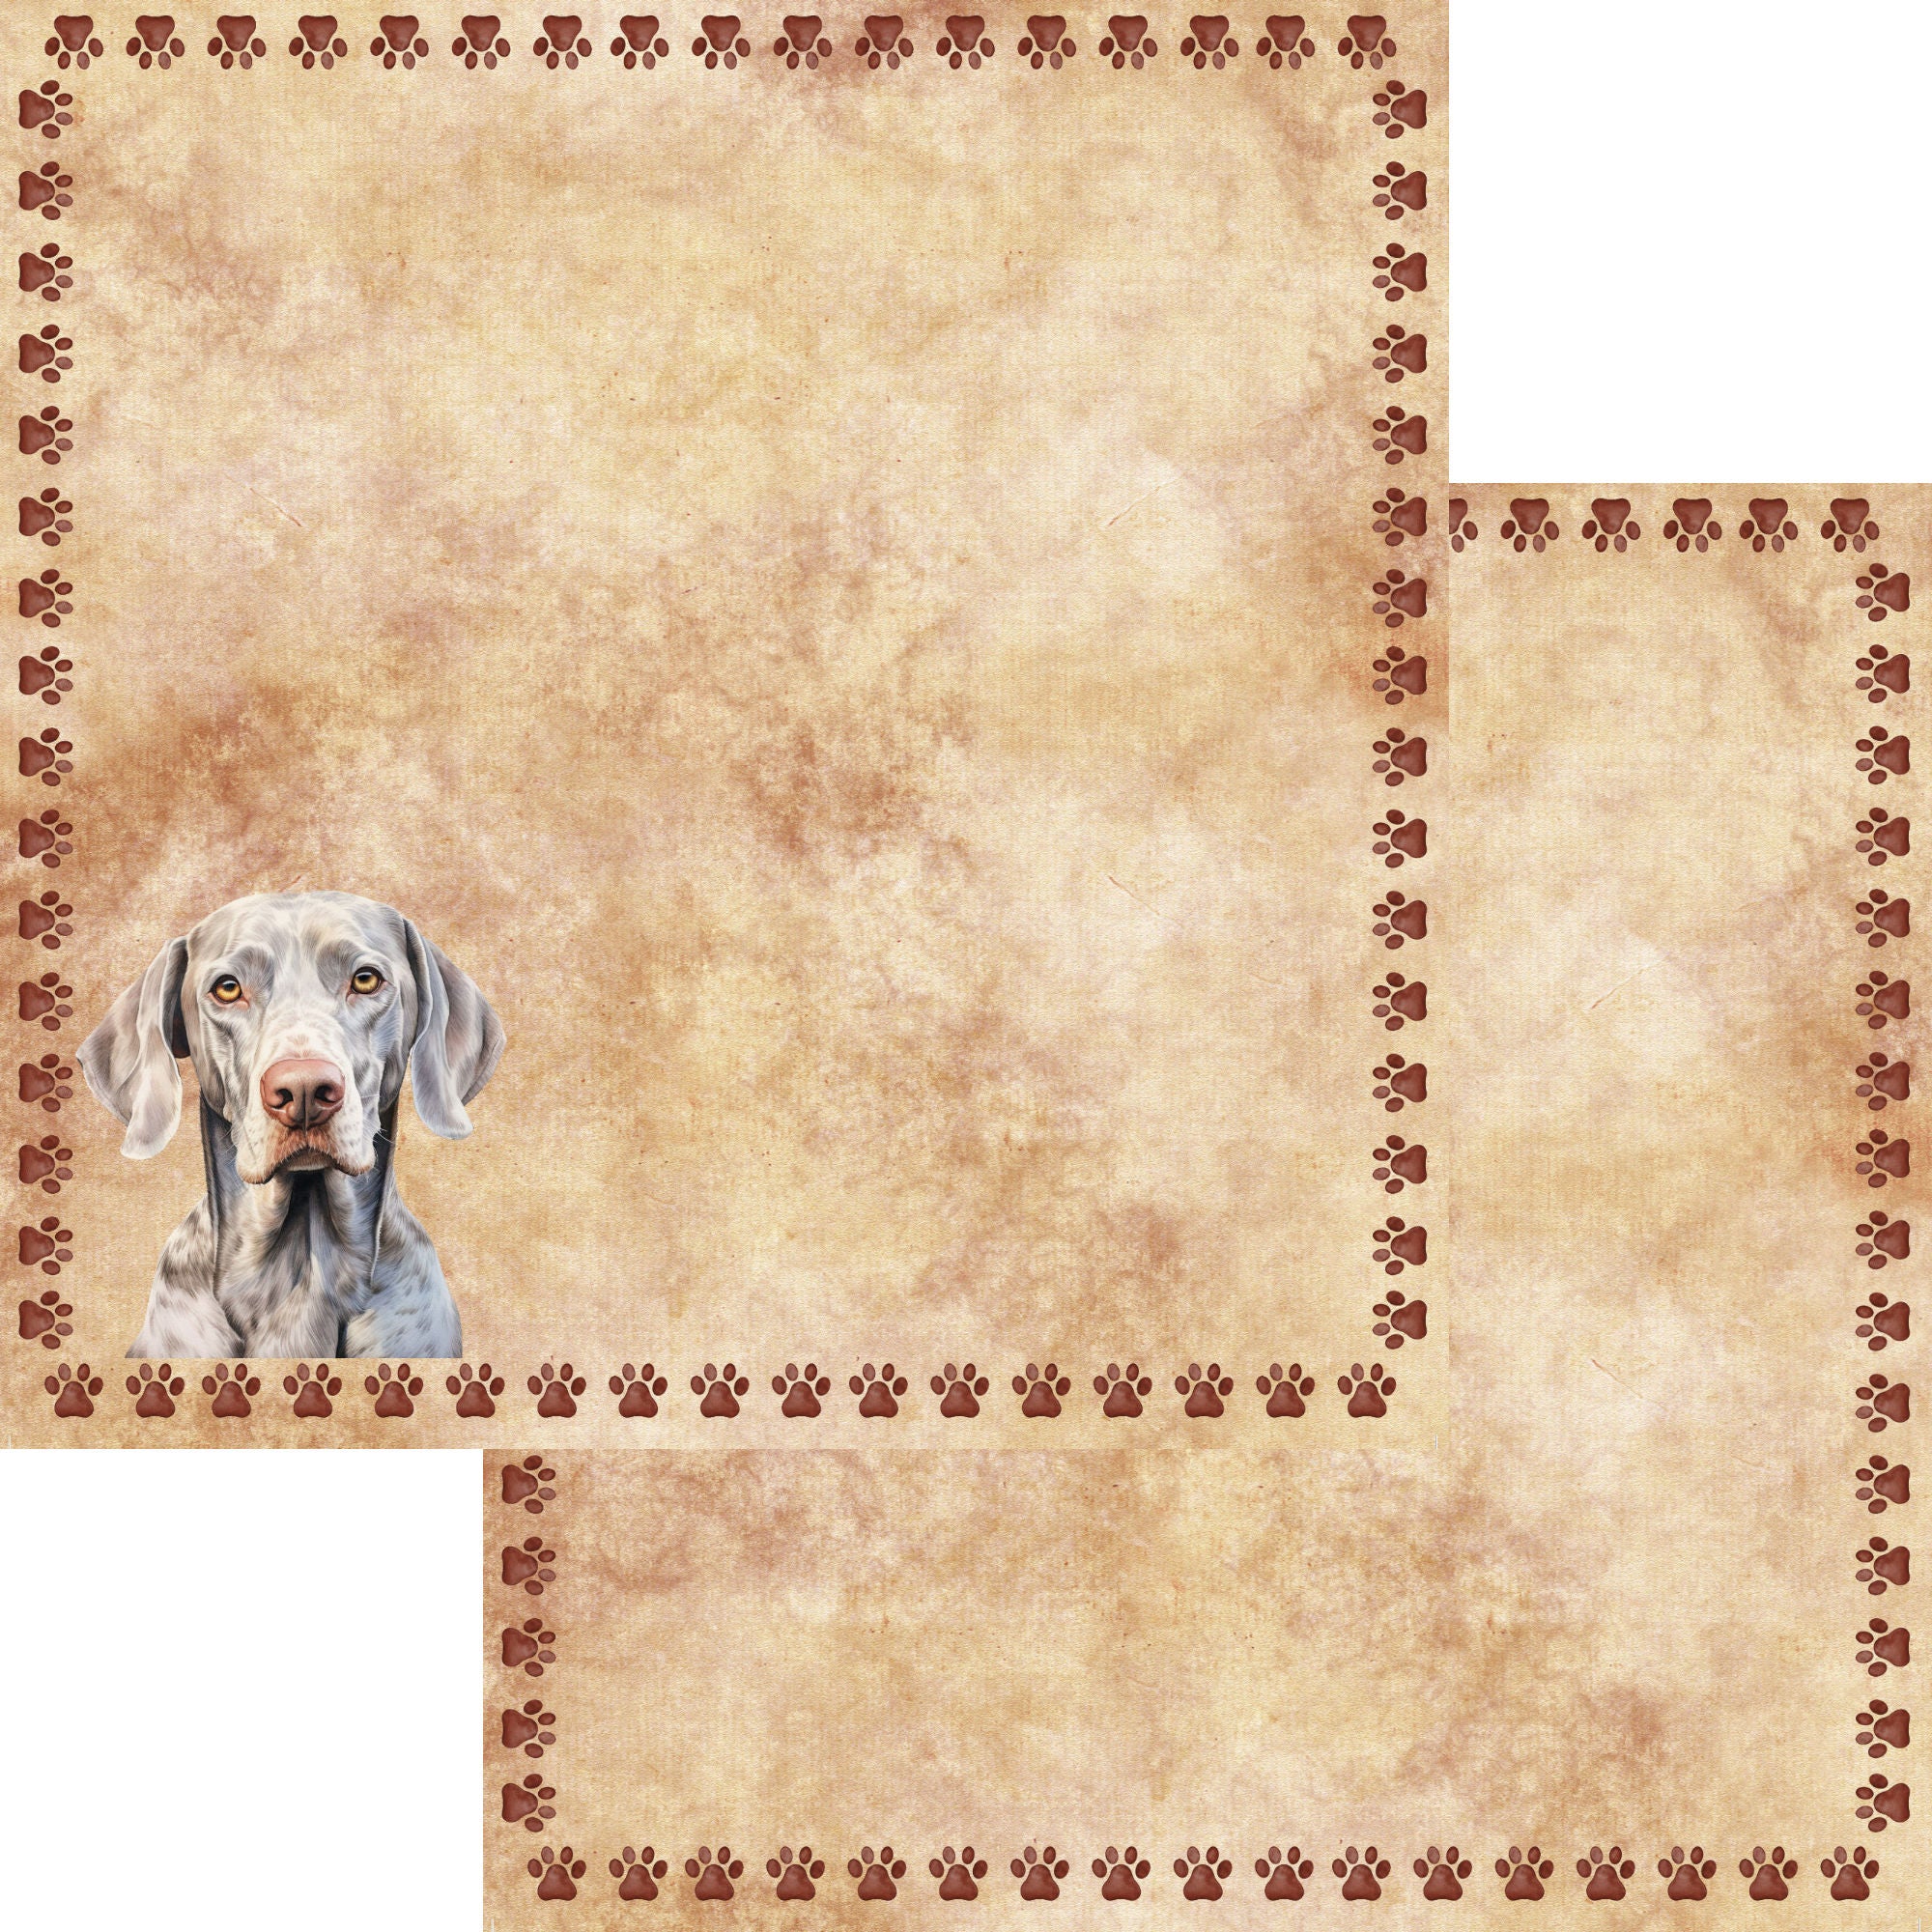 Dog Breeds Collection Weimaraner 12 x 12 Double-Sided Scrapbook Paper by SSC Designs